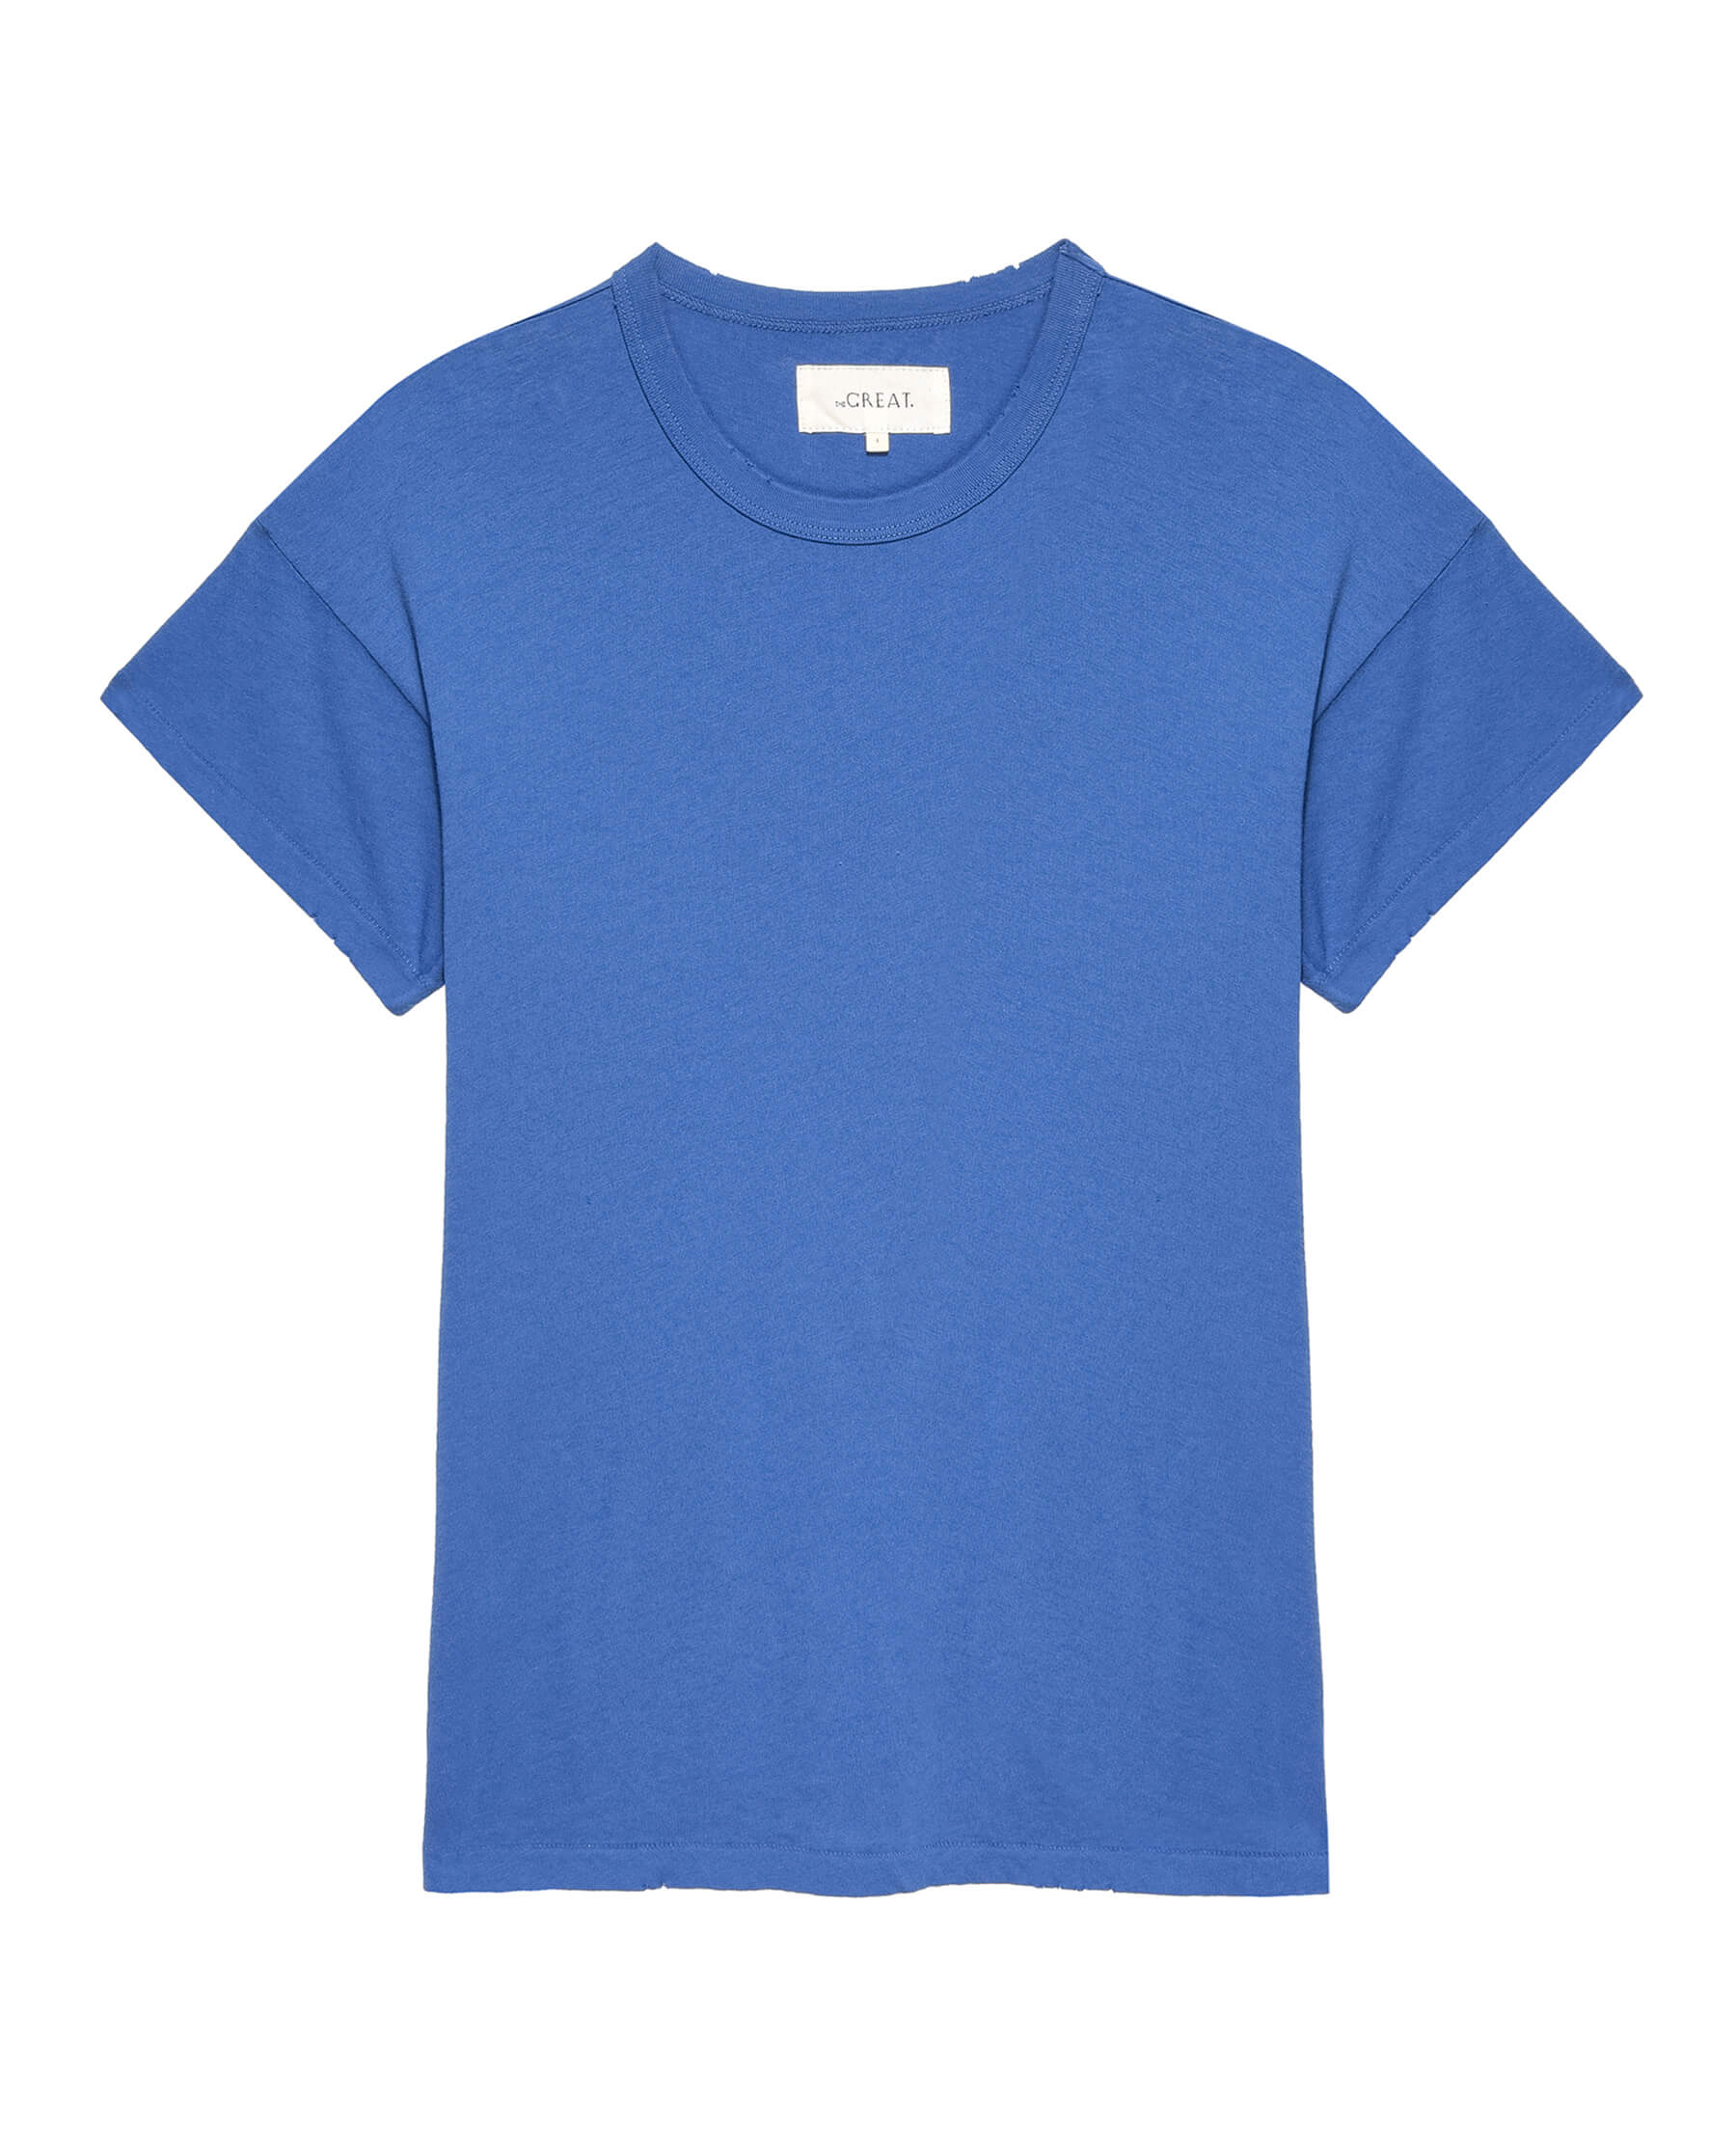 The Boxy Crew. Solid -- Glacier Blue TEES THE GREAT. HOL 23 KNITS